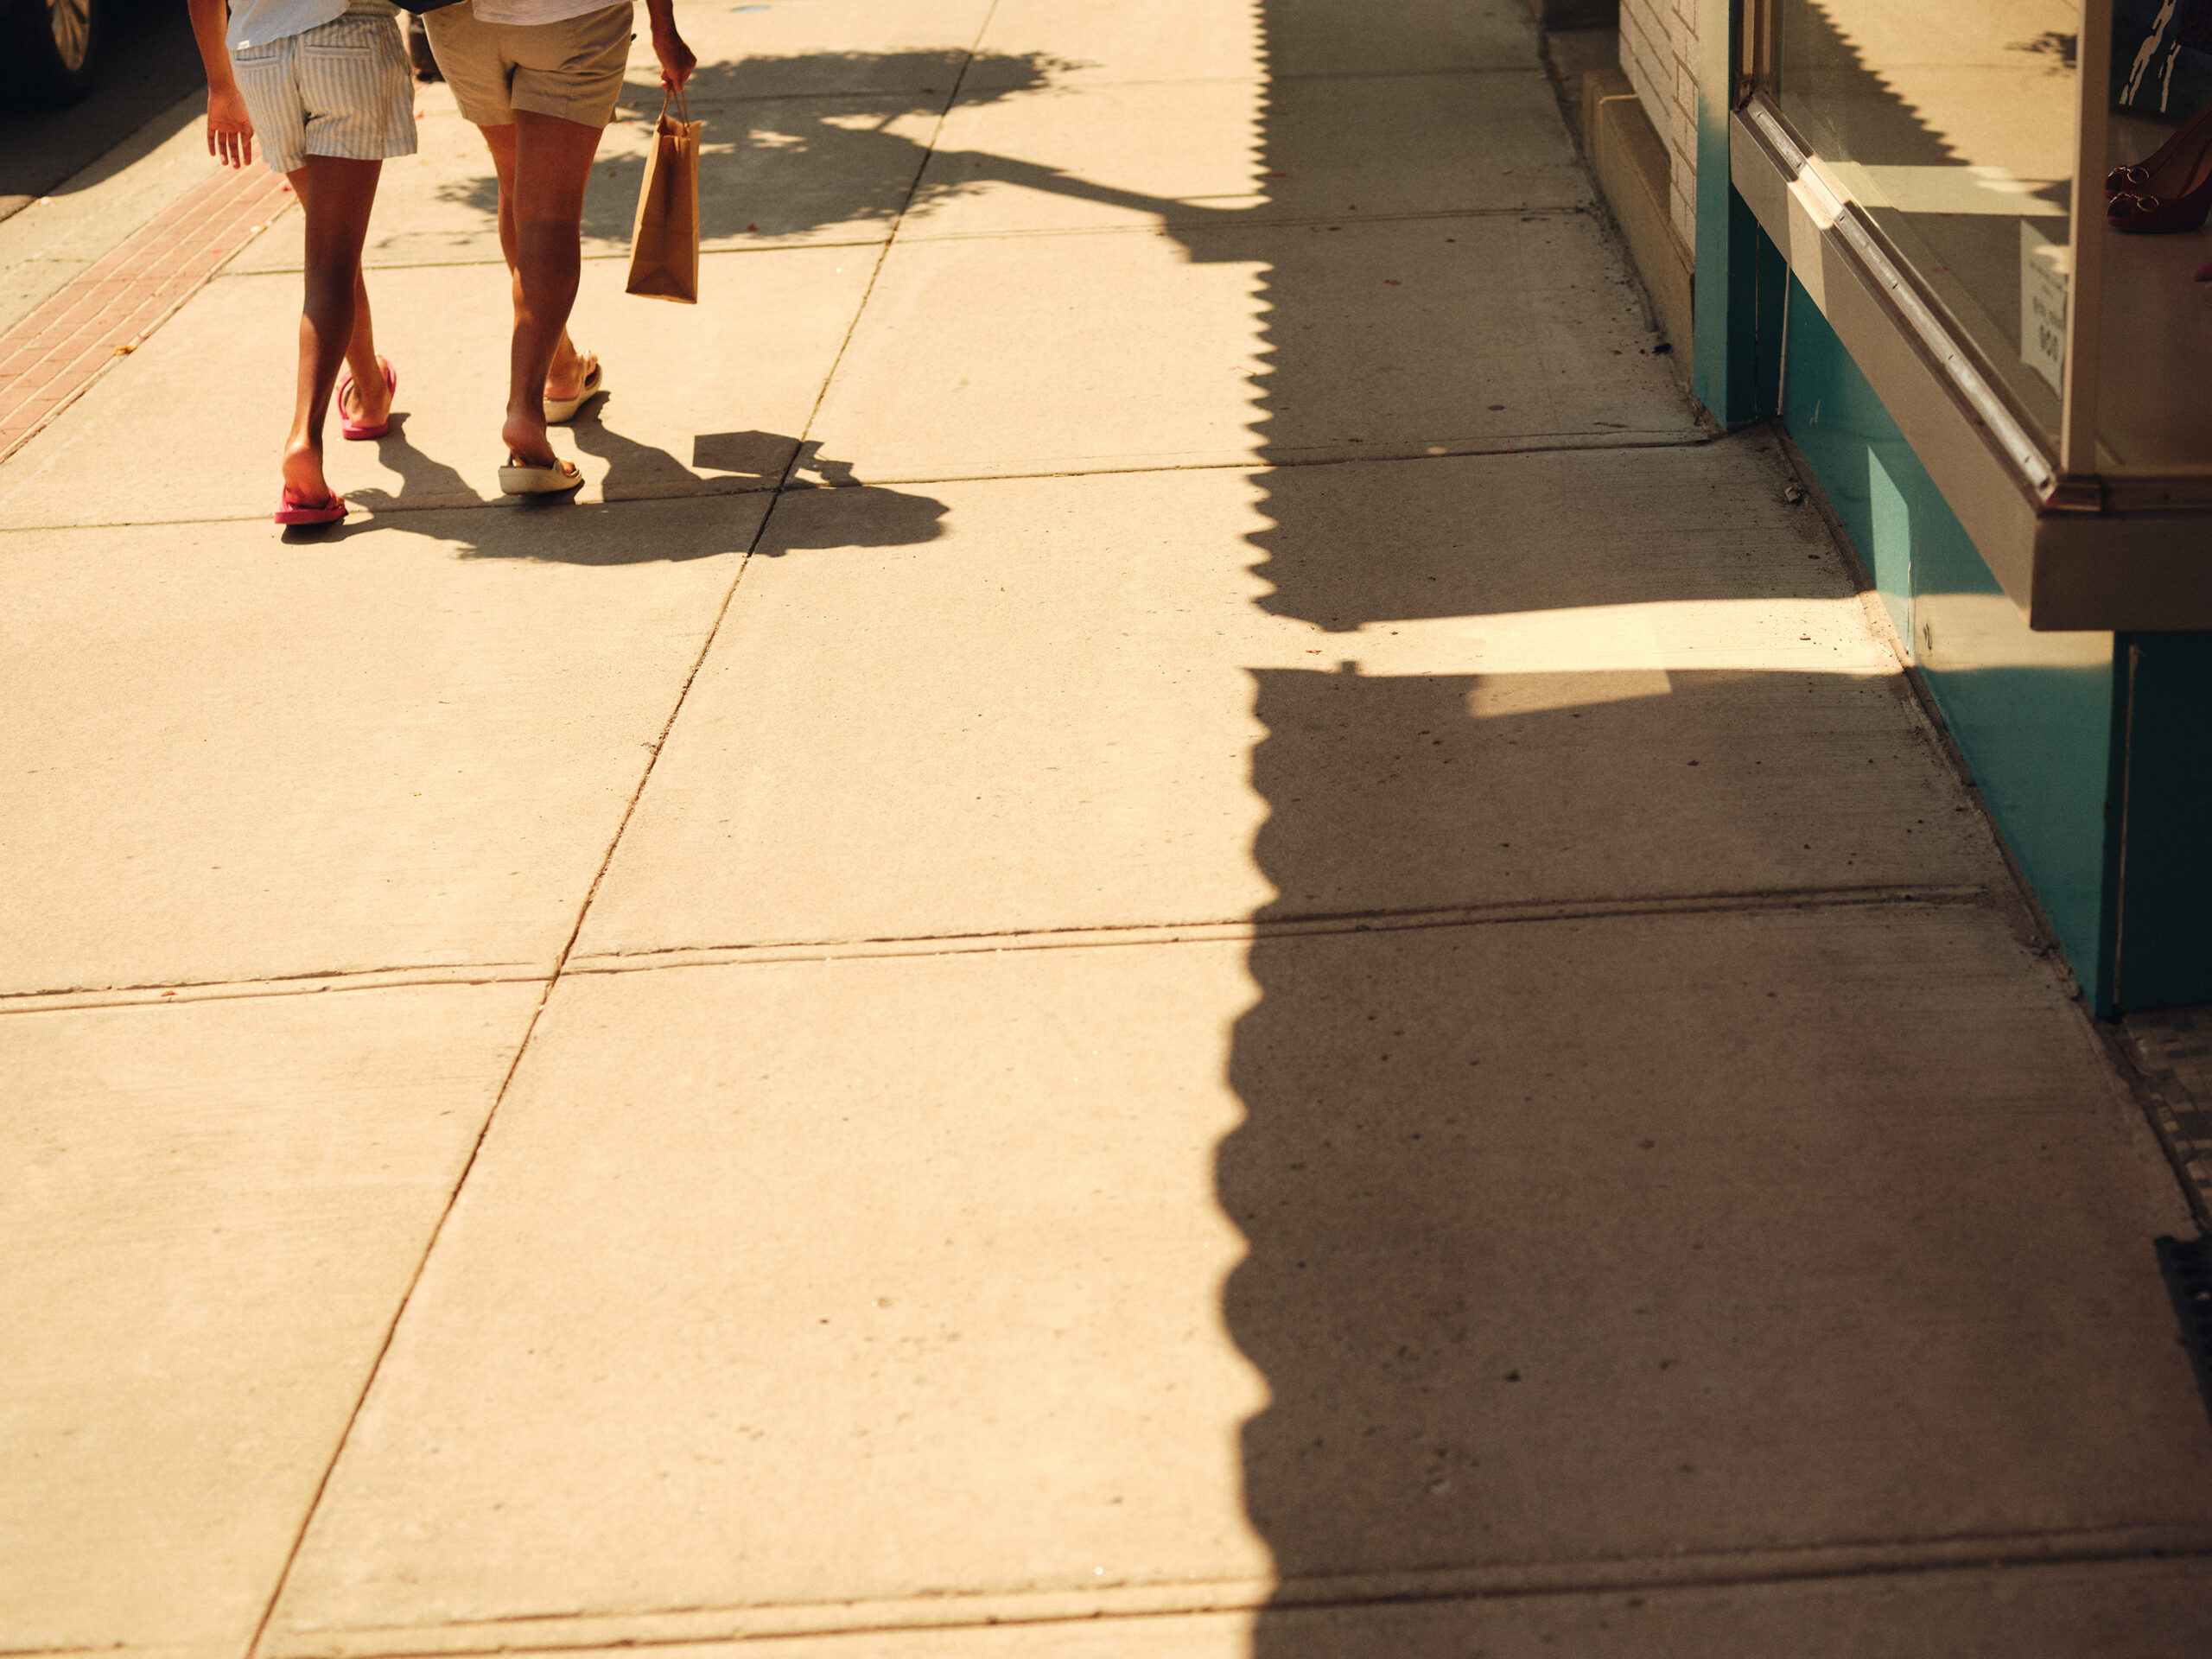 A man and woman walking down a sidewalk with the sun shining